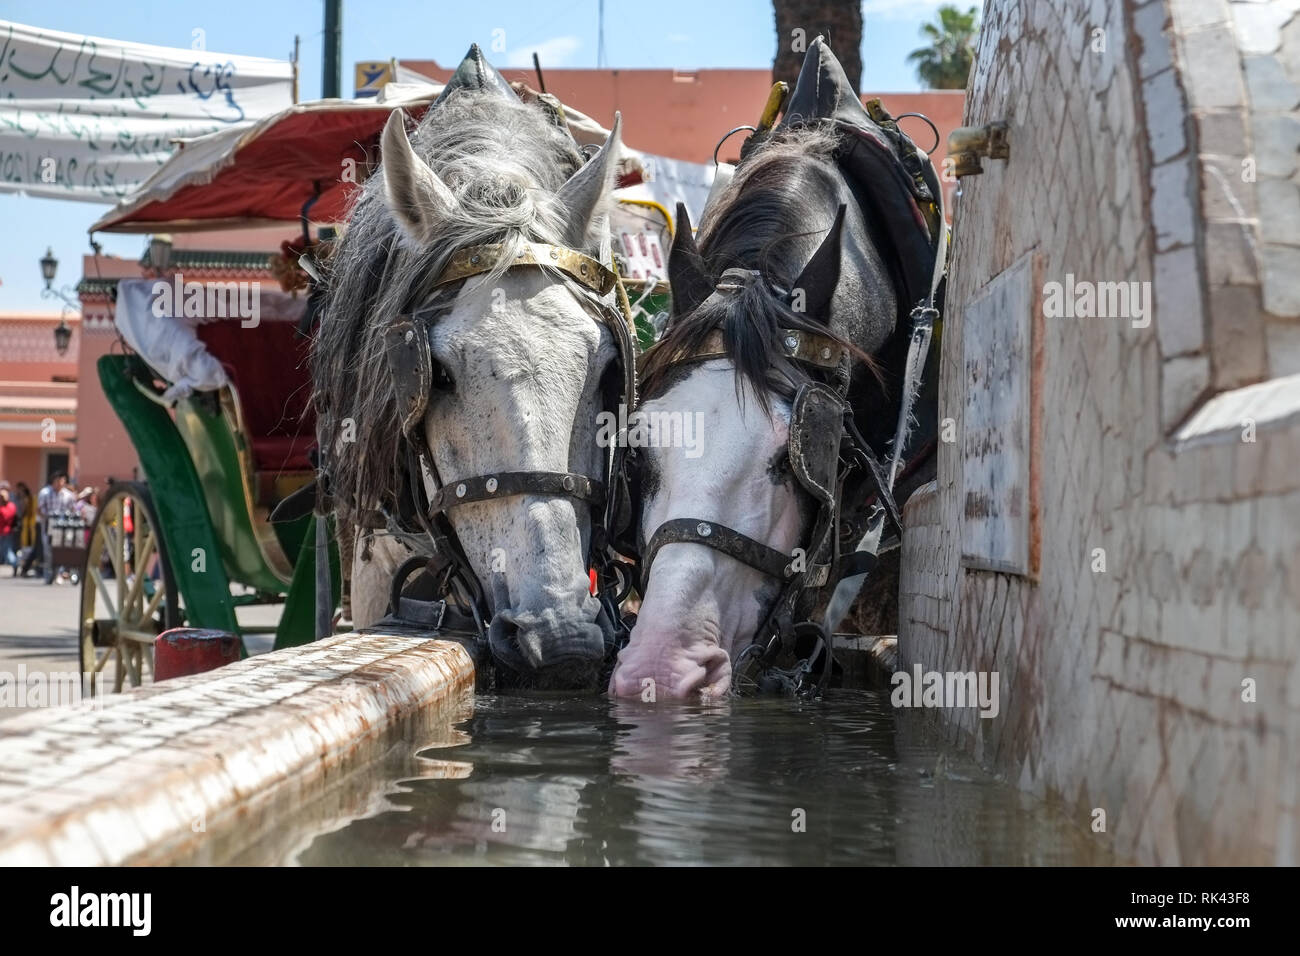 Thirsty Carriage Horses, Marrakech Stock Photo